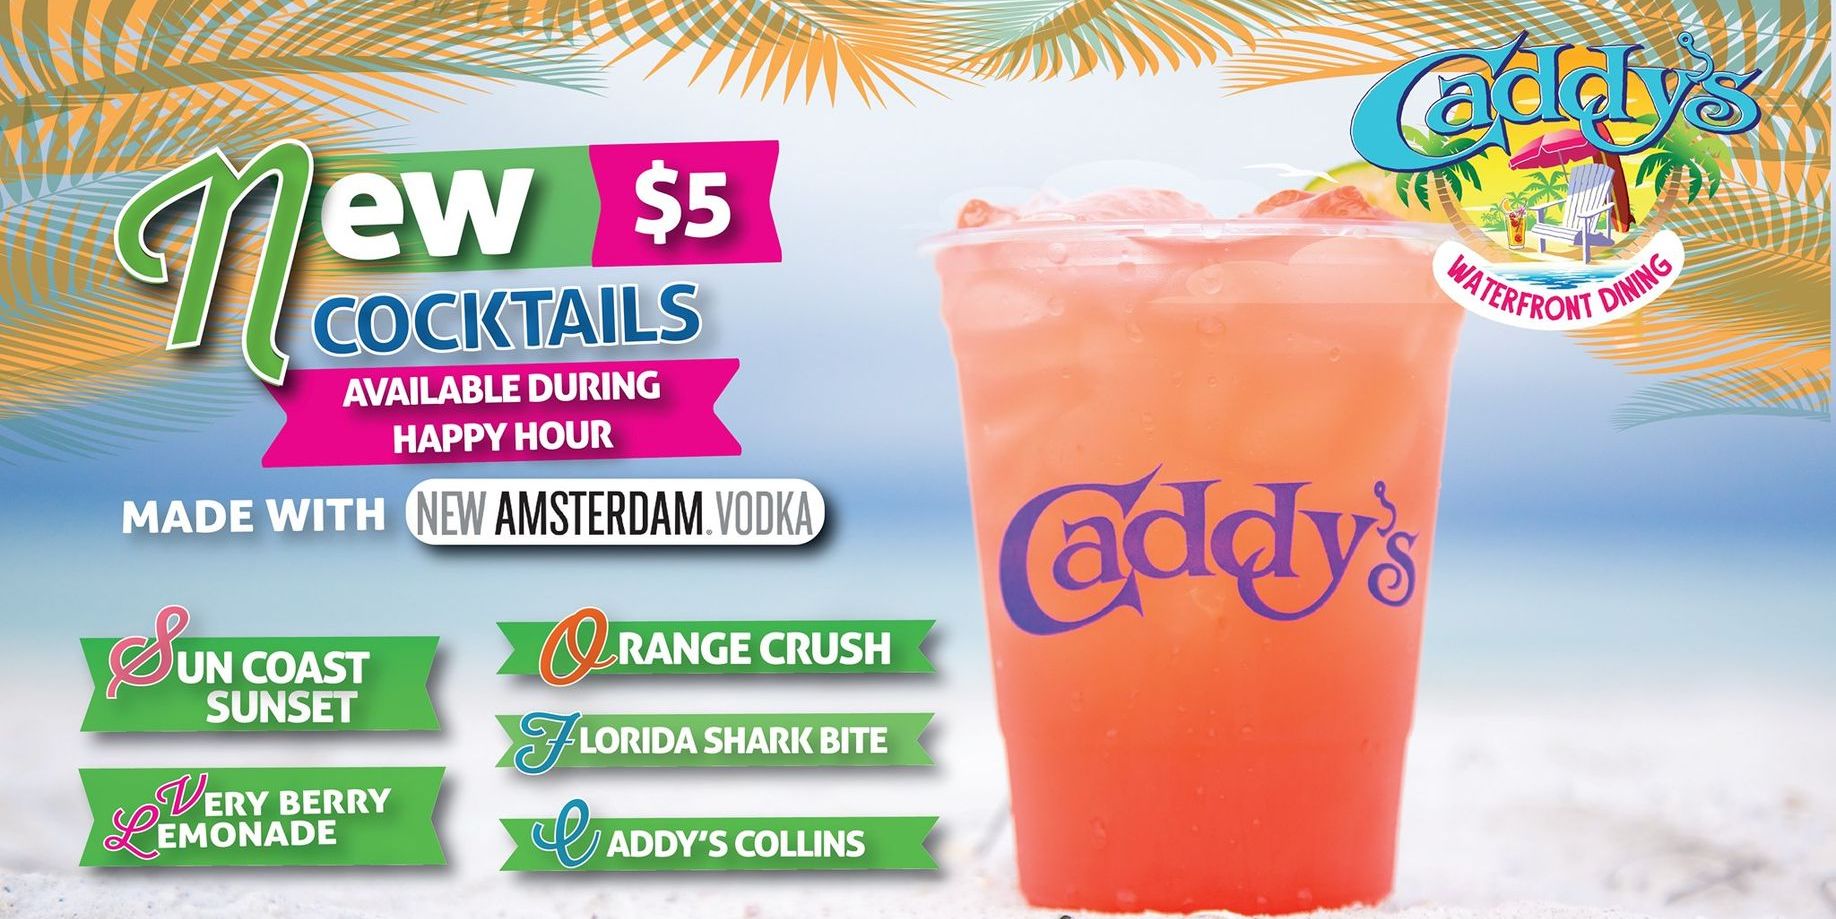 NEW $5 Cocktails! promotional image